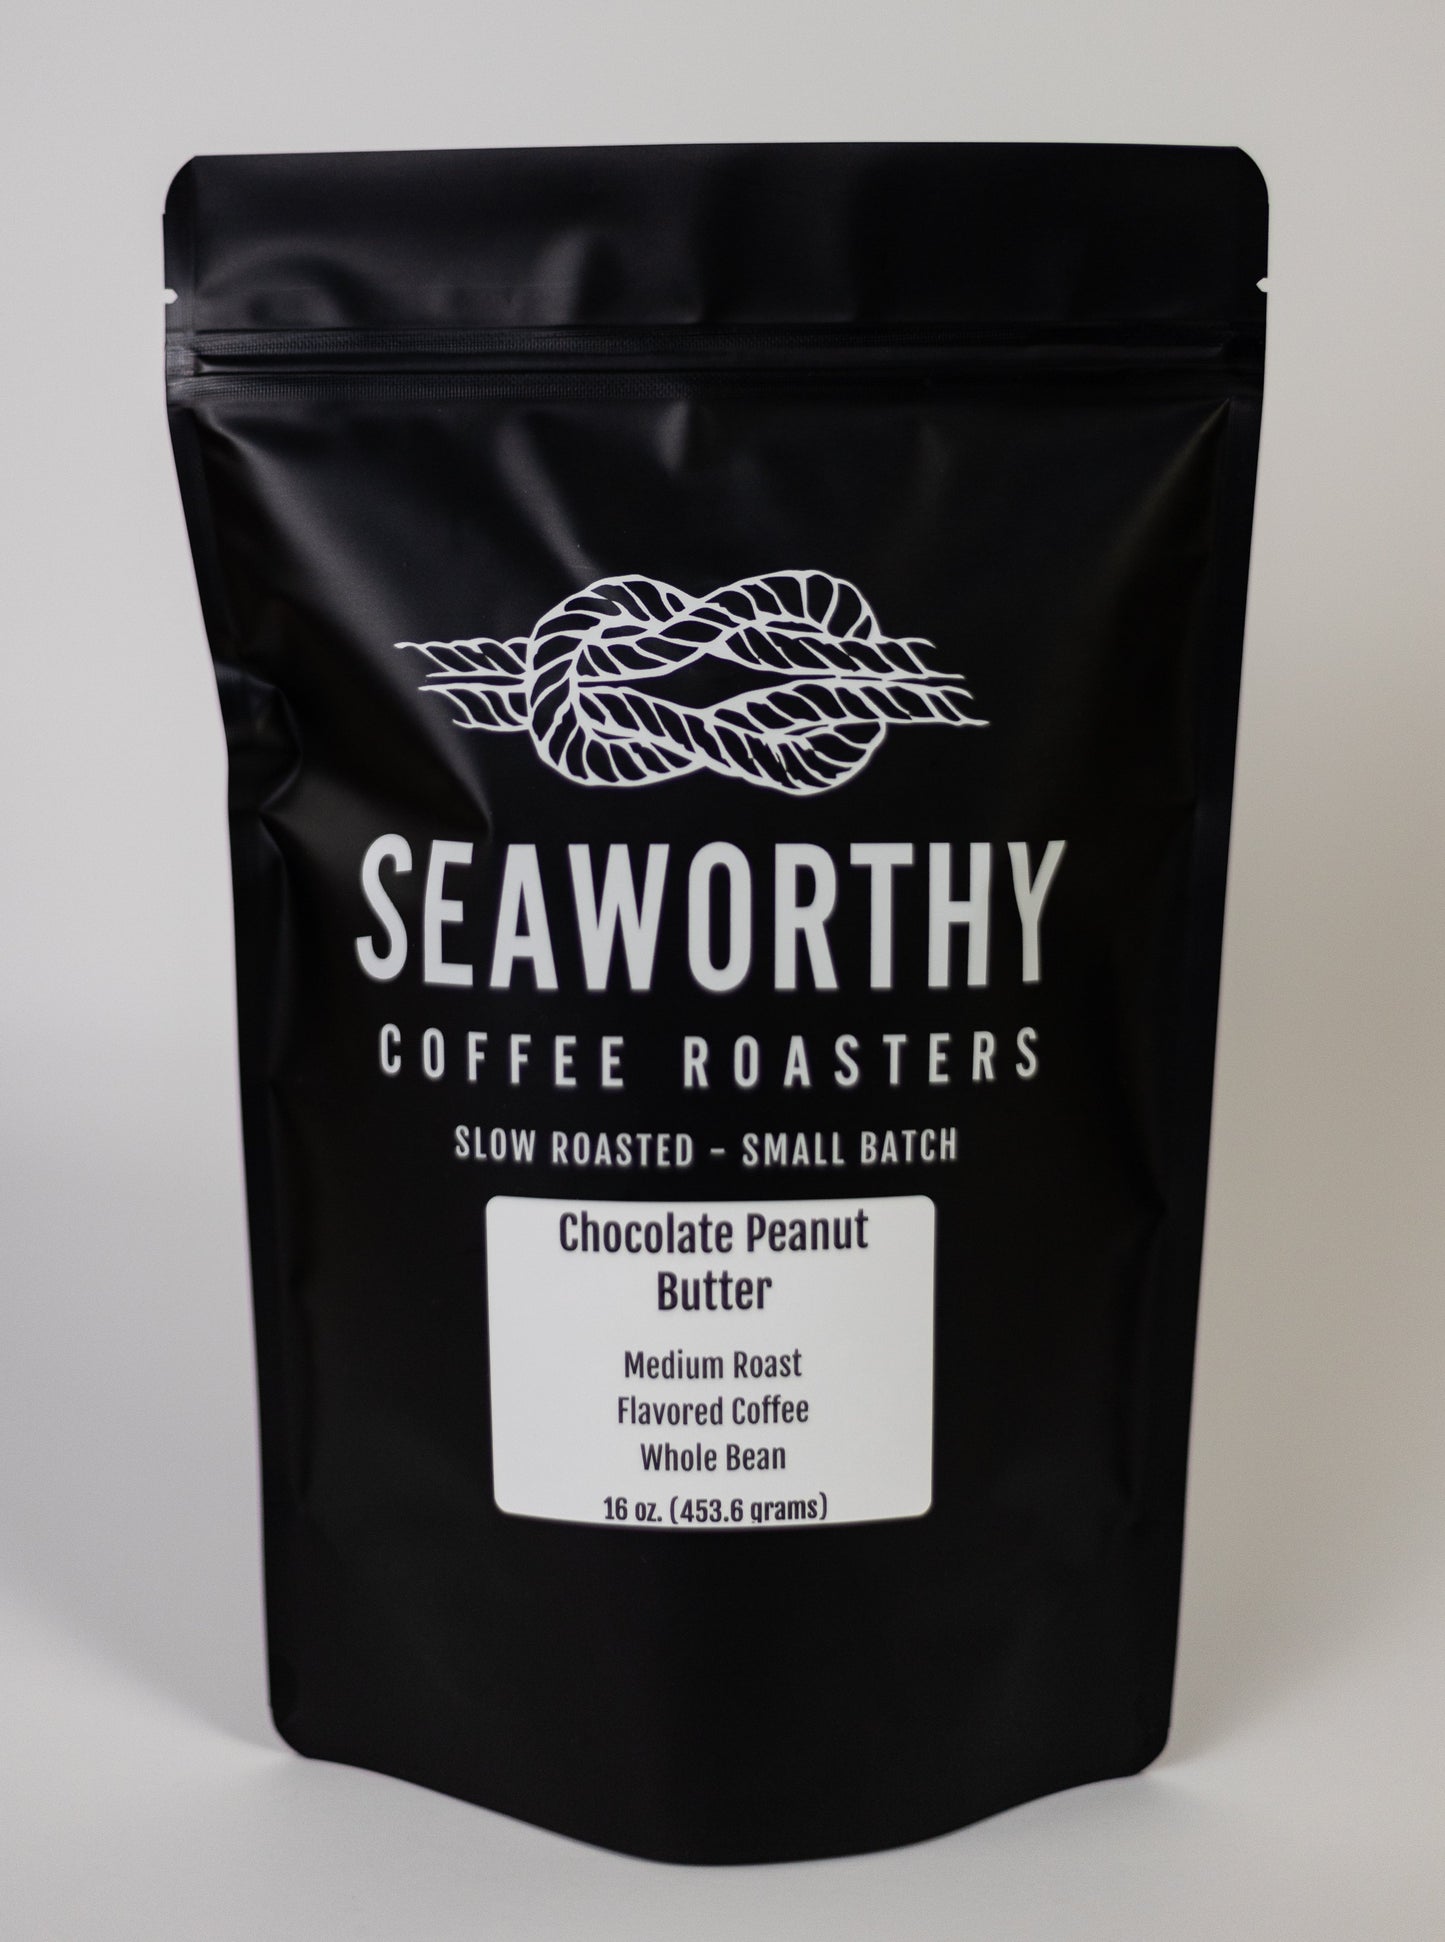 Seaworthy slow roasted, small batch, low acid coffee. 1 pound bag of Chocolate Peanut Butter flavored coffee.